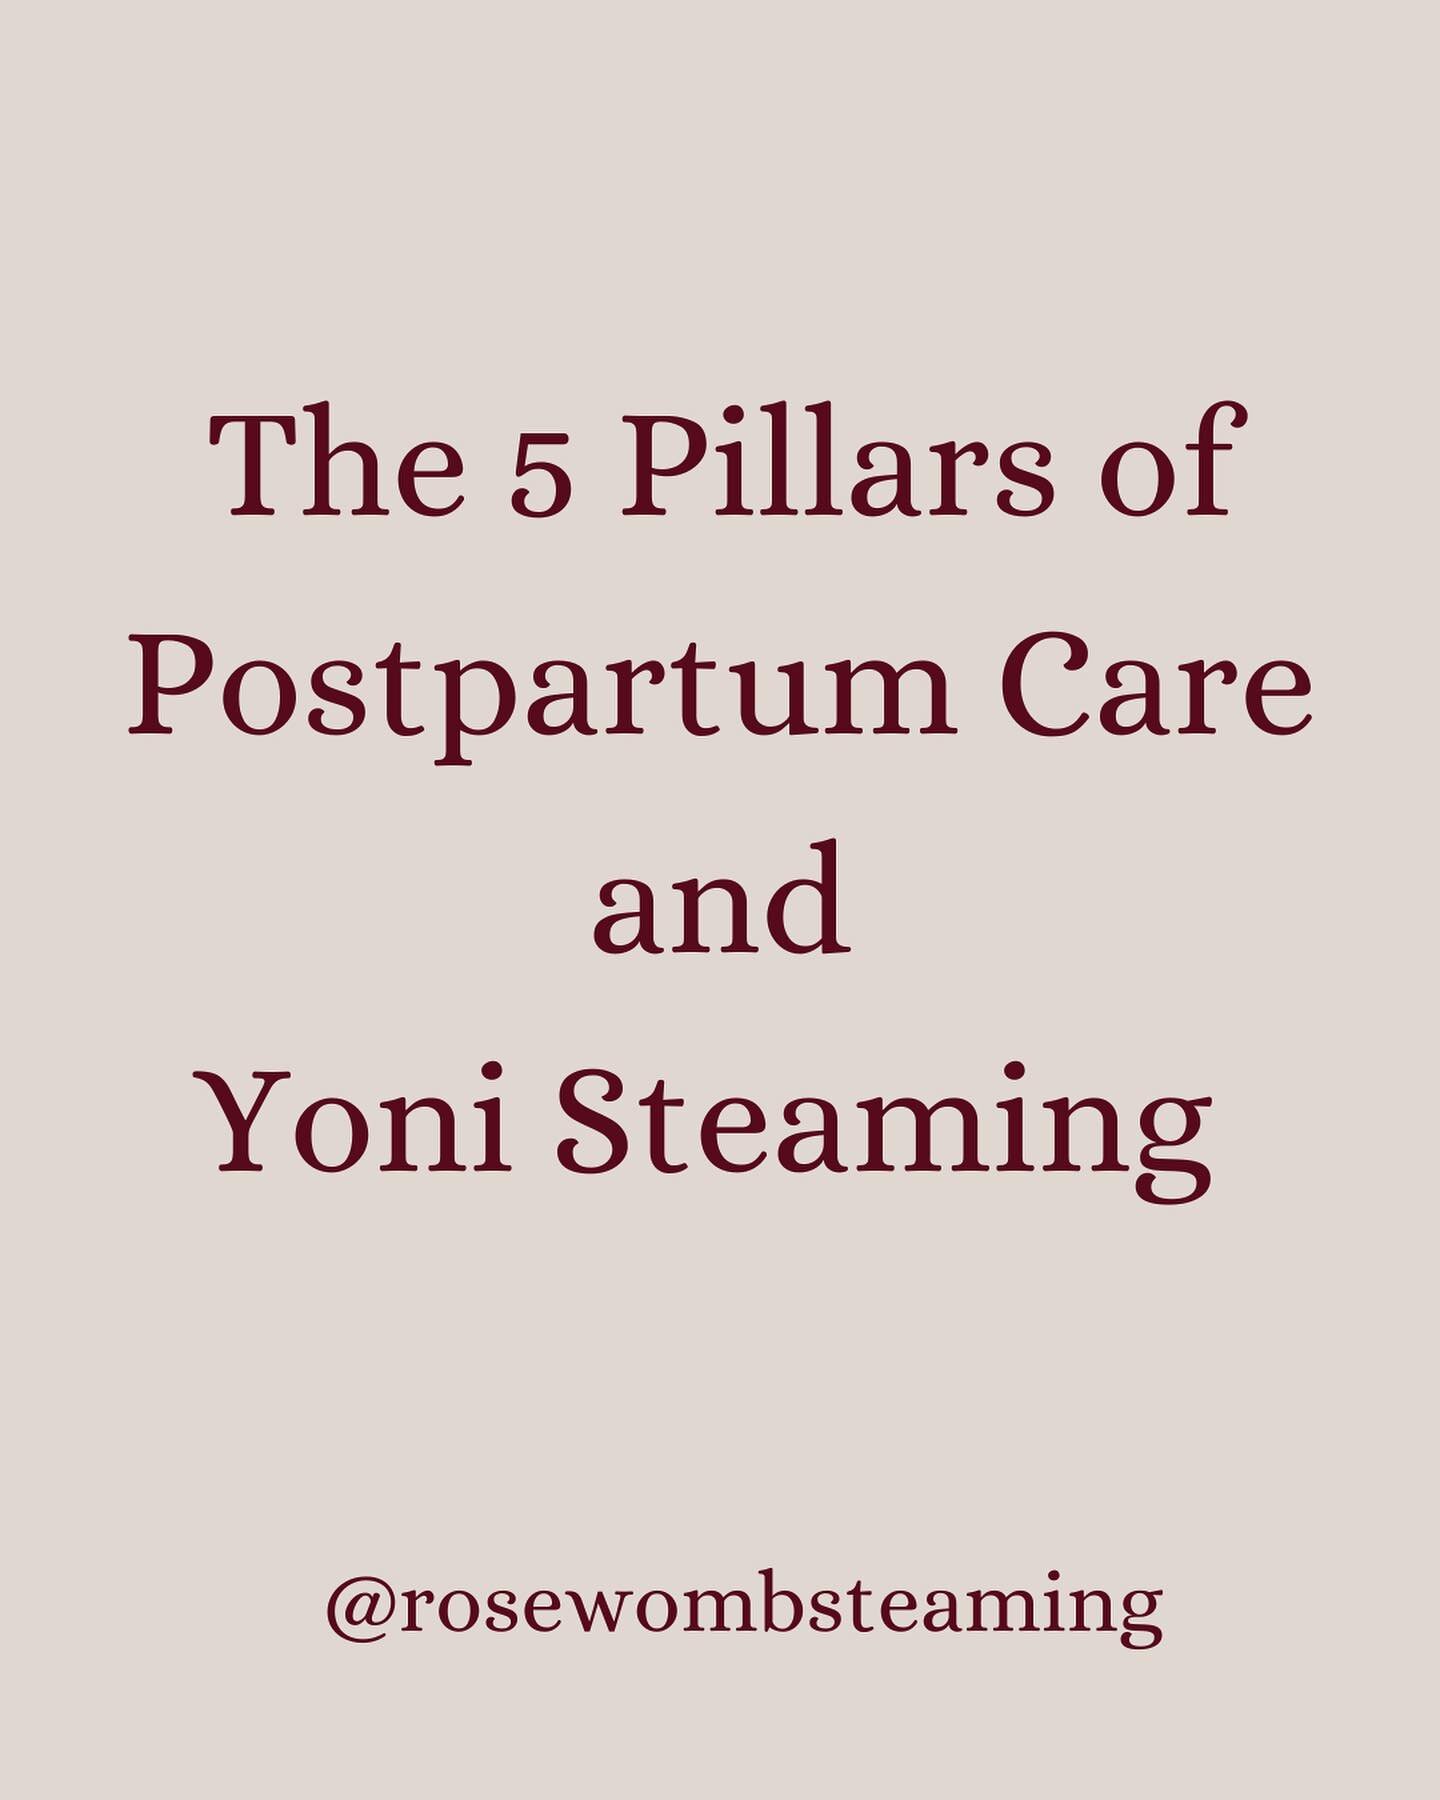 The 5 pillars of postpartum care and vaginal steaming 

If you know about the 5 foundational pillars of postpartum care (pioneered by Rachelle Garcia Seliga of Innate Traditions)

You will know that each pillar has a root in a mothers physiological n